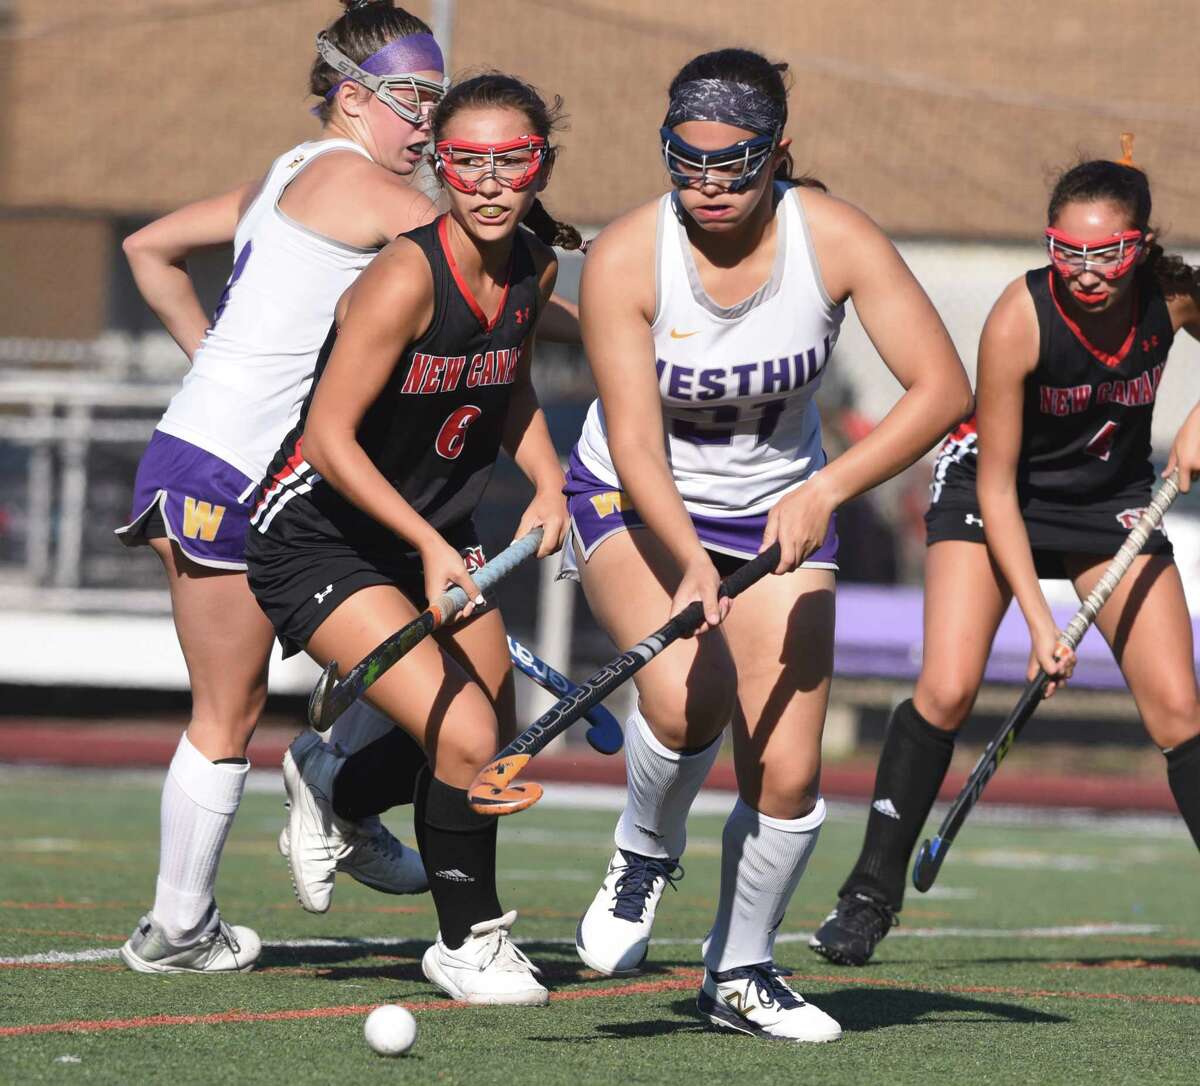 Westhill's Olivia Conte (27) and New Canaan's Ellie Luciano (6) battle for the ball during a field hockey game at Westhill High School in Stamford on Thursday, Sept. 19, 2019.